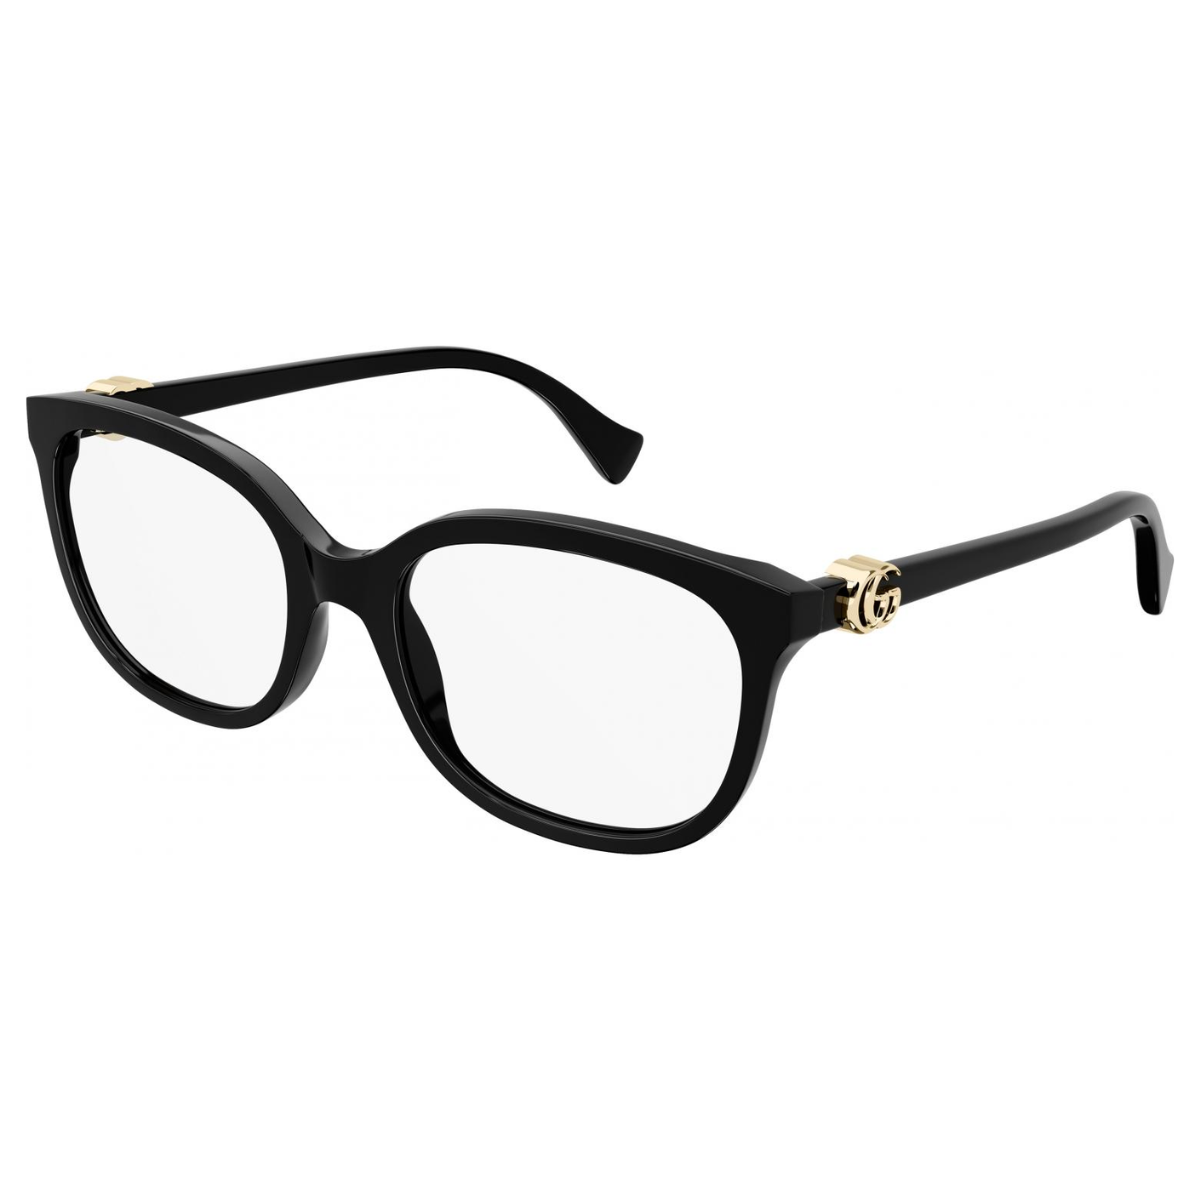 "Upgrade Your Style: Gucci 1075O Frames for Men at Optorium"